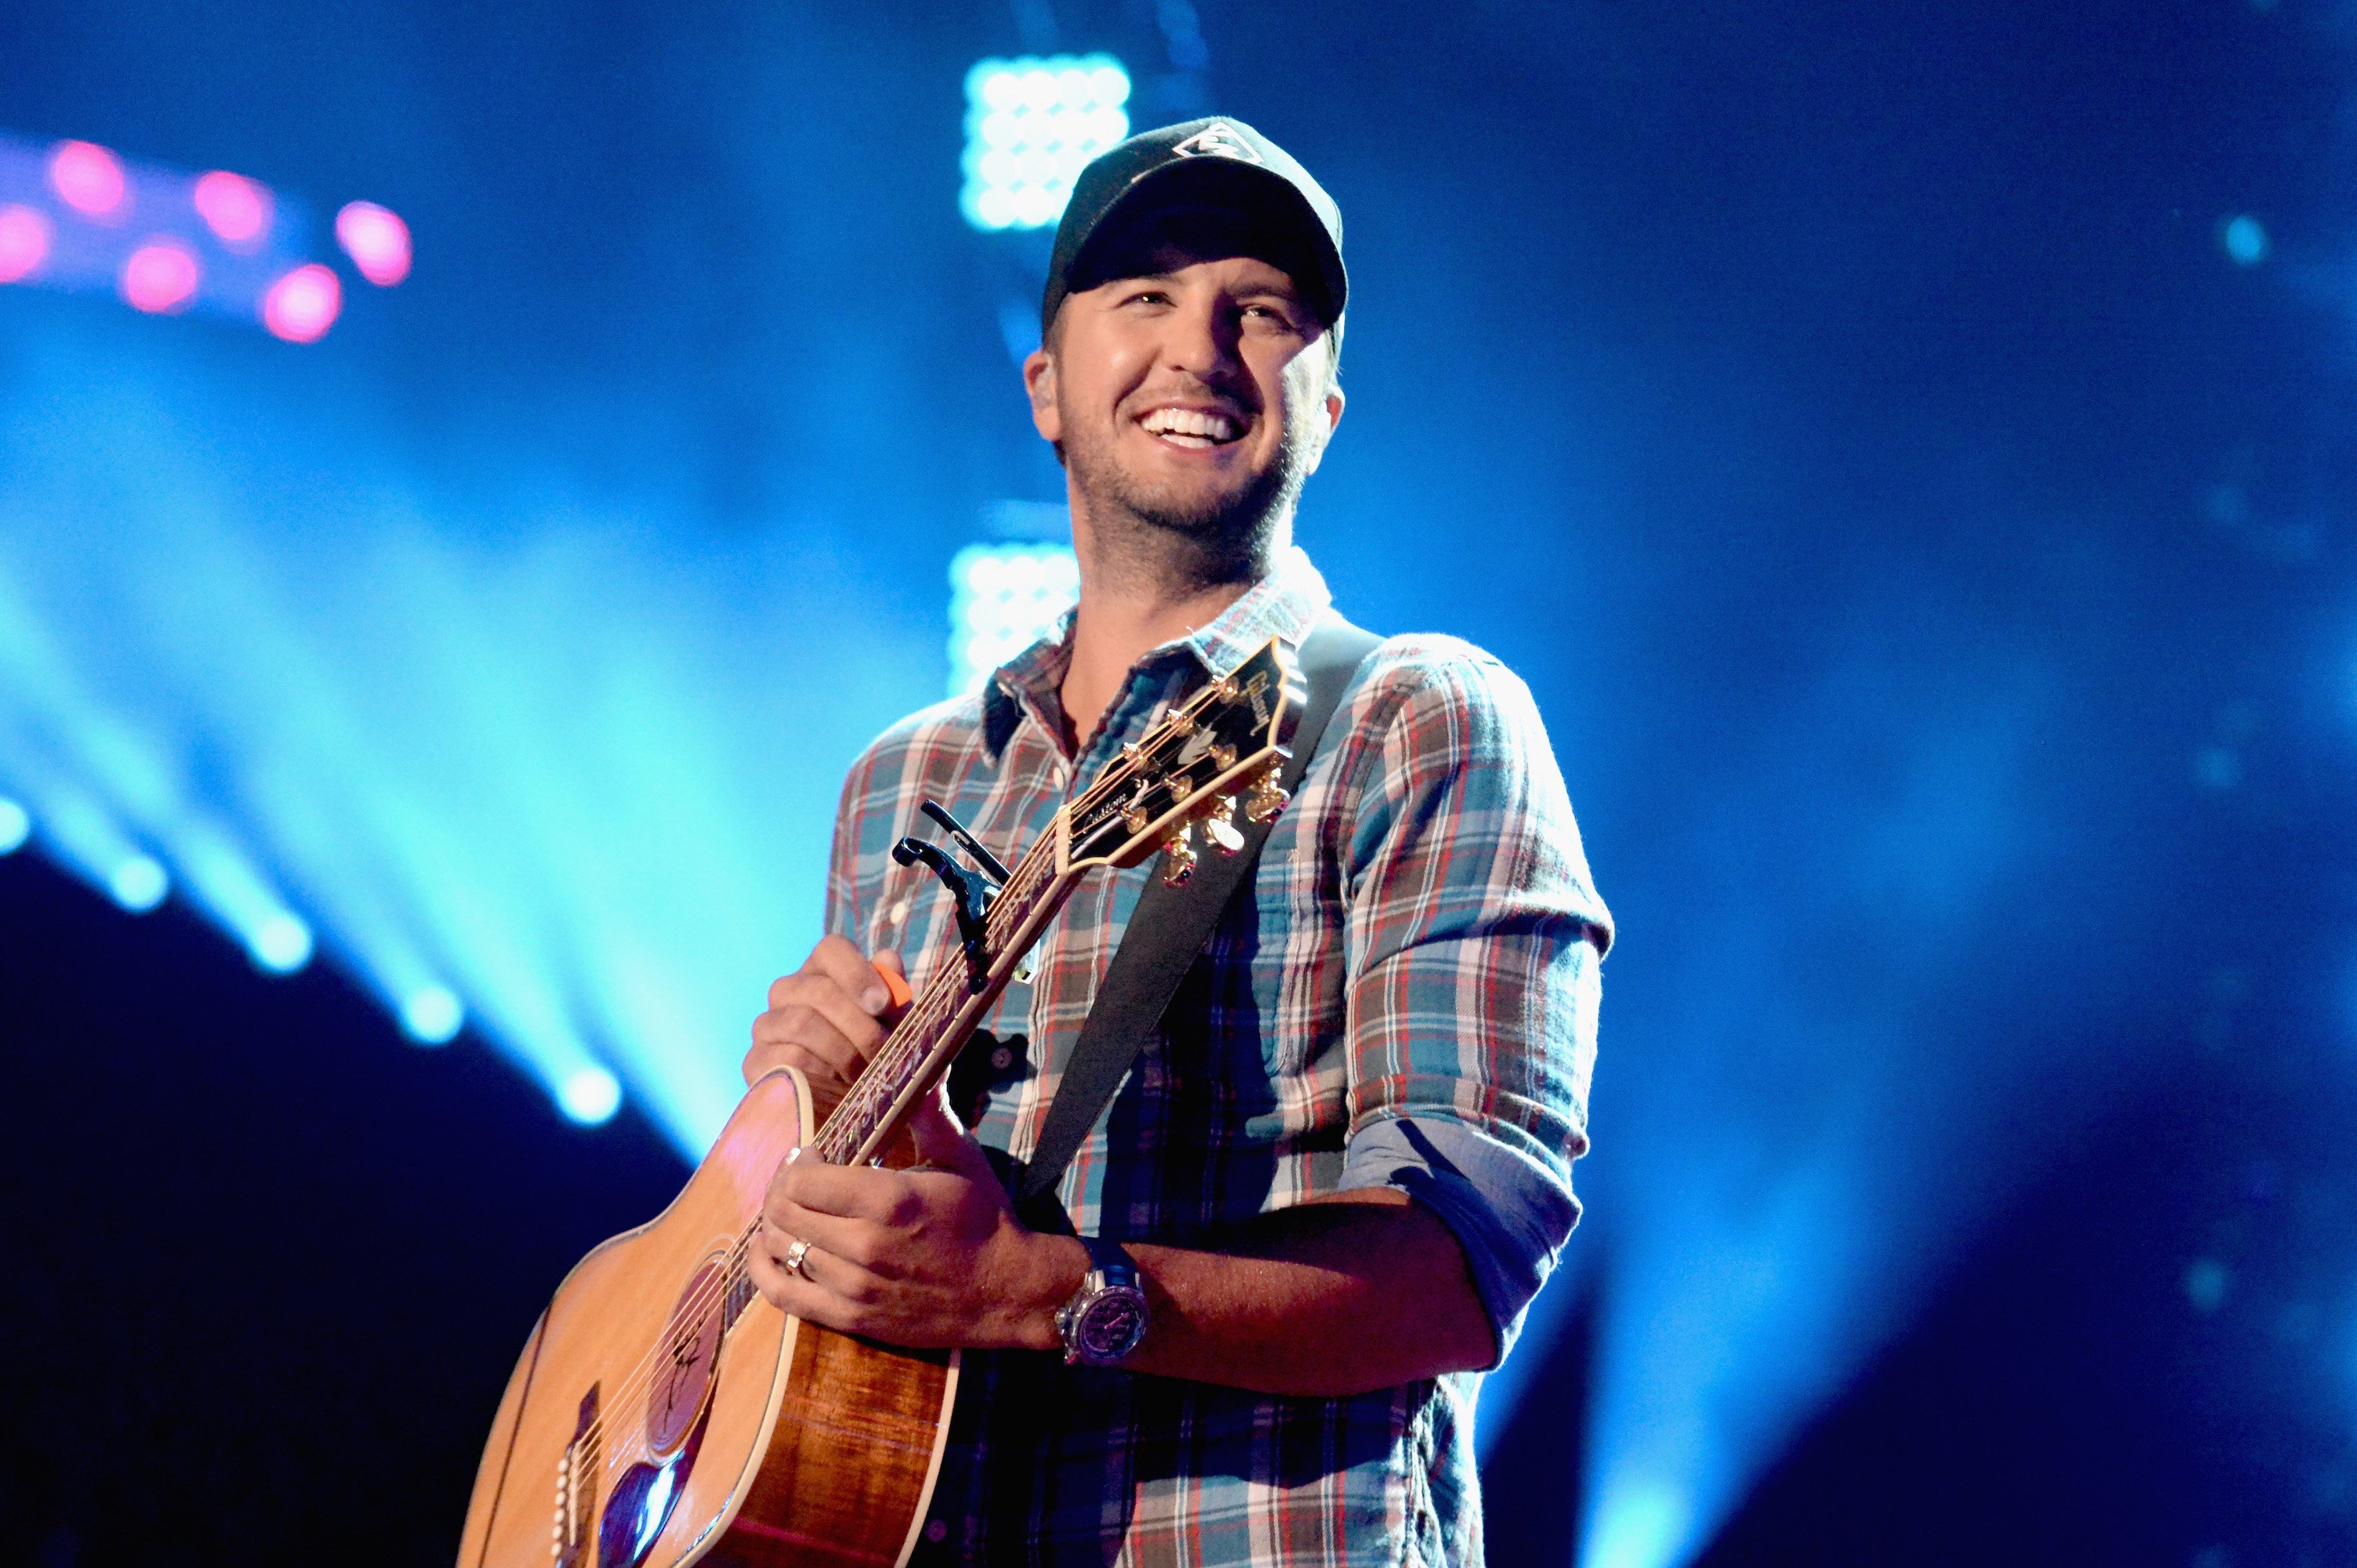 ‘Rain Is a Good Thing’ by Luke Bryan — Lyrics and Meaning